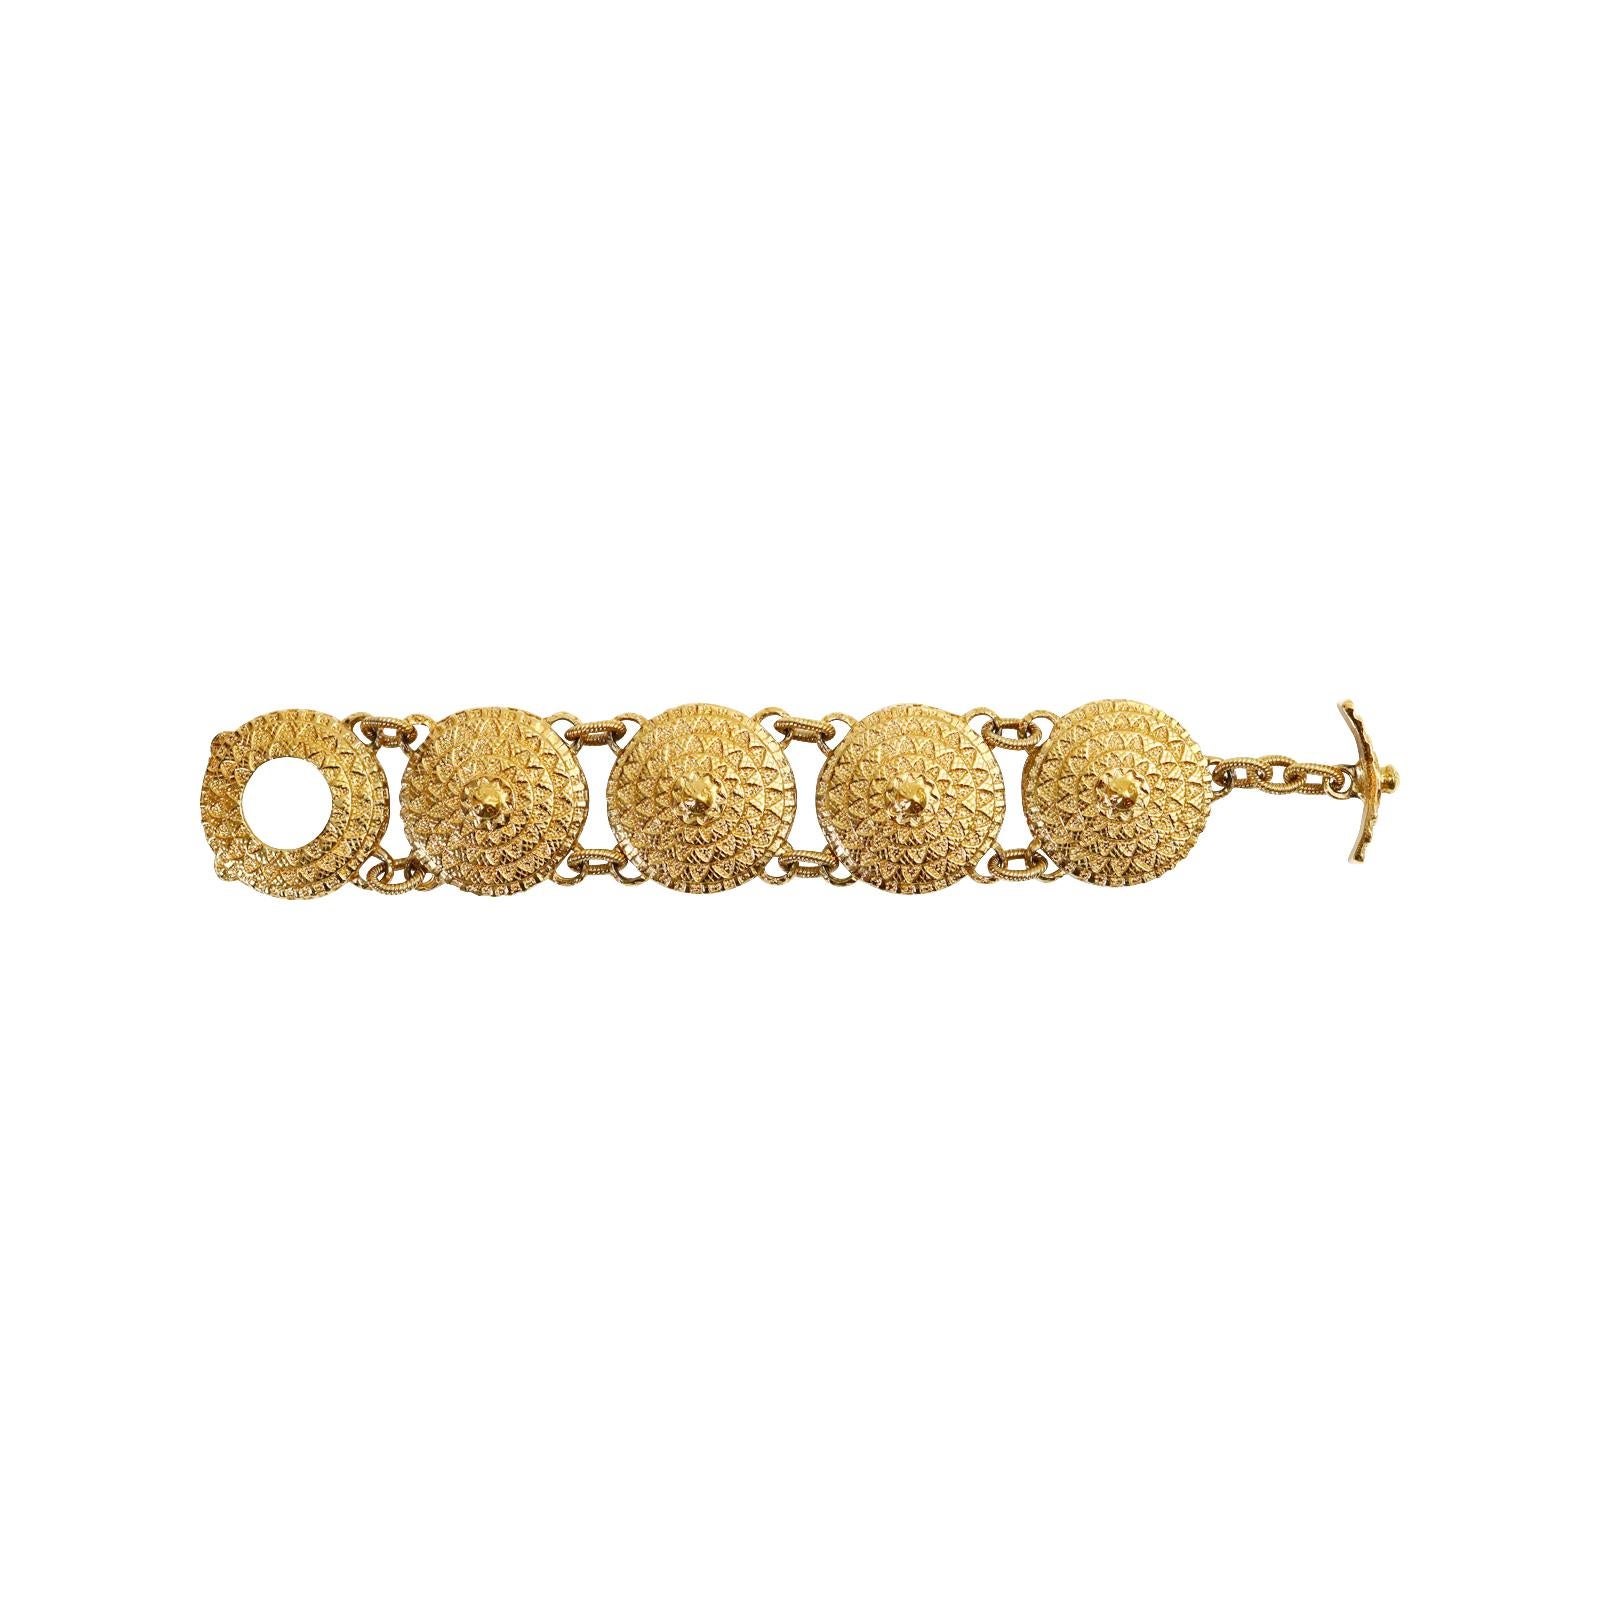 Vintage Guy Laroche Gold Shields Link Bracelet Circa 1980s. There are four shields or at least that is what I call them and then an open one where the toggle closes. A very classic edgy bracelet. A very well known celebrity has the matching earrings